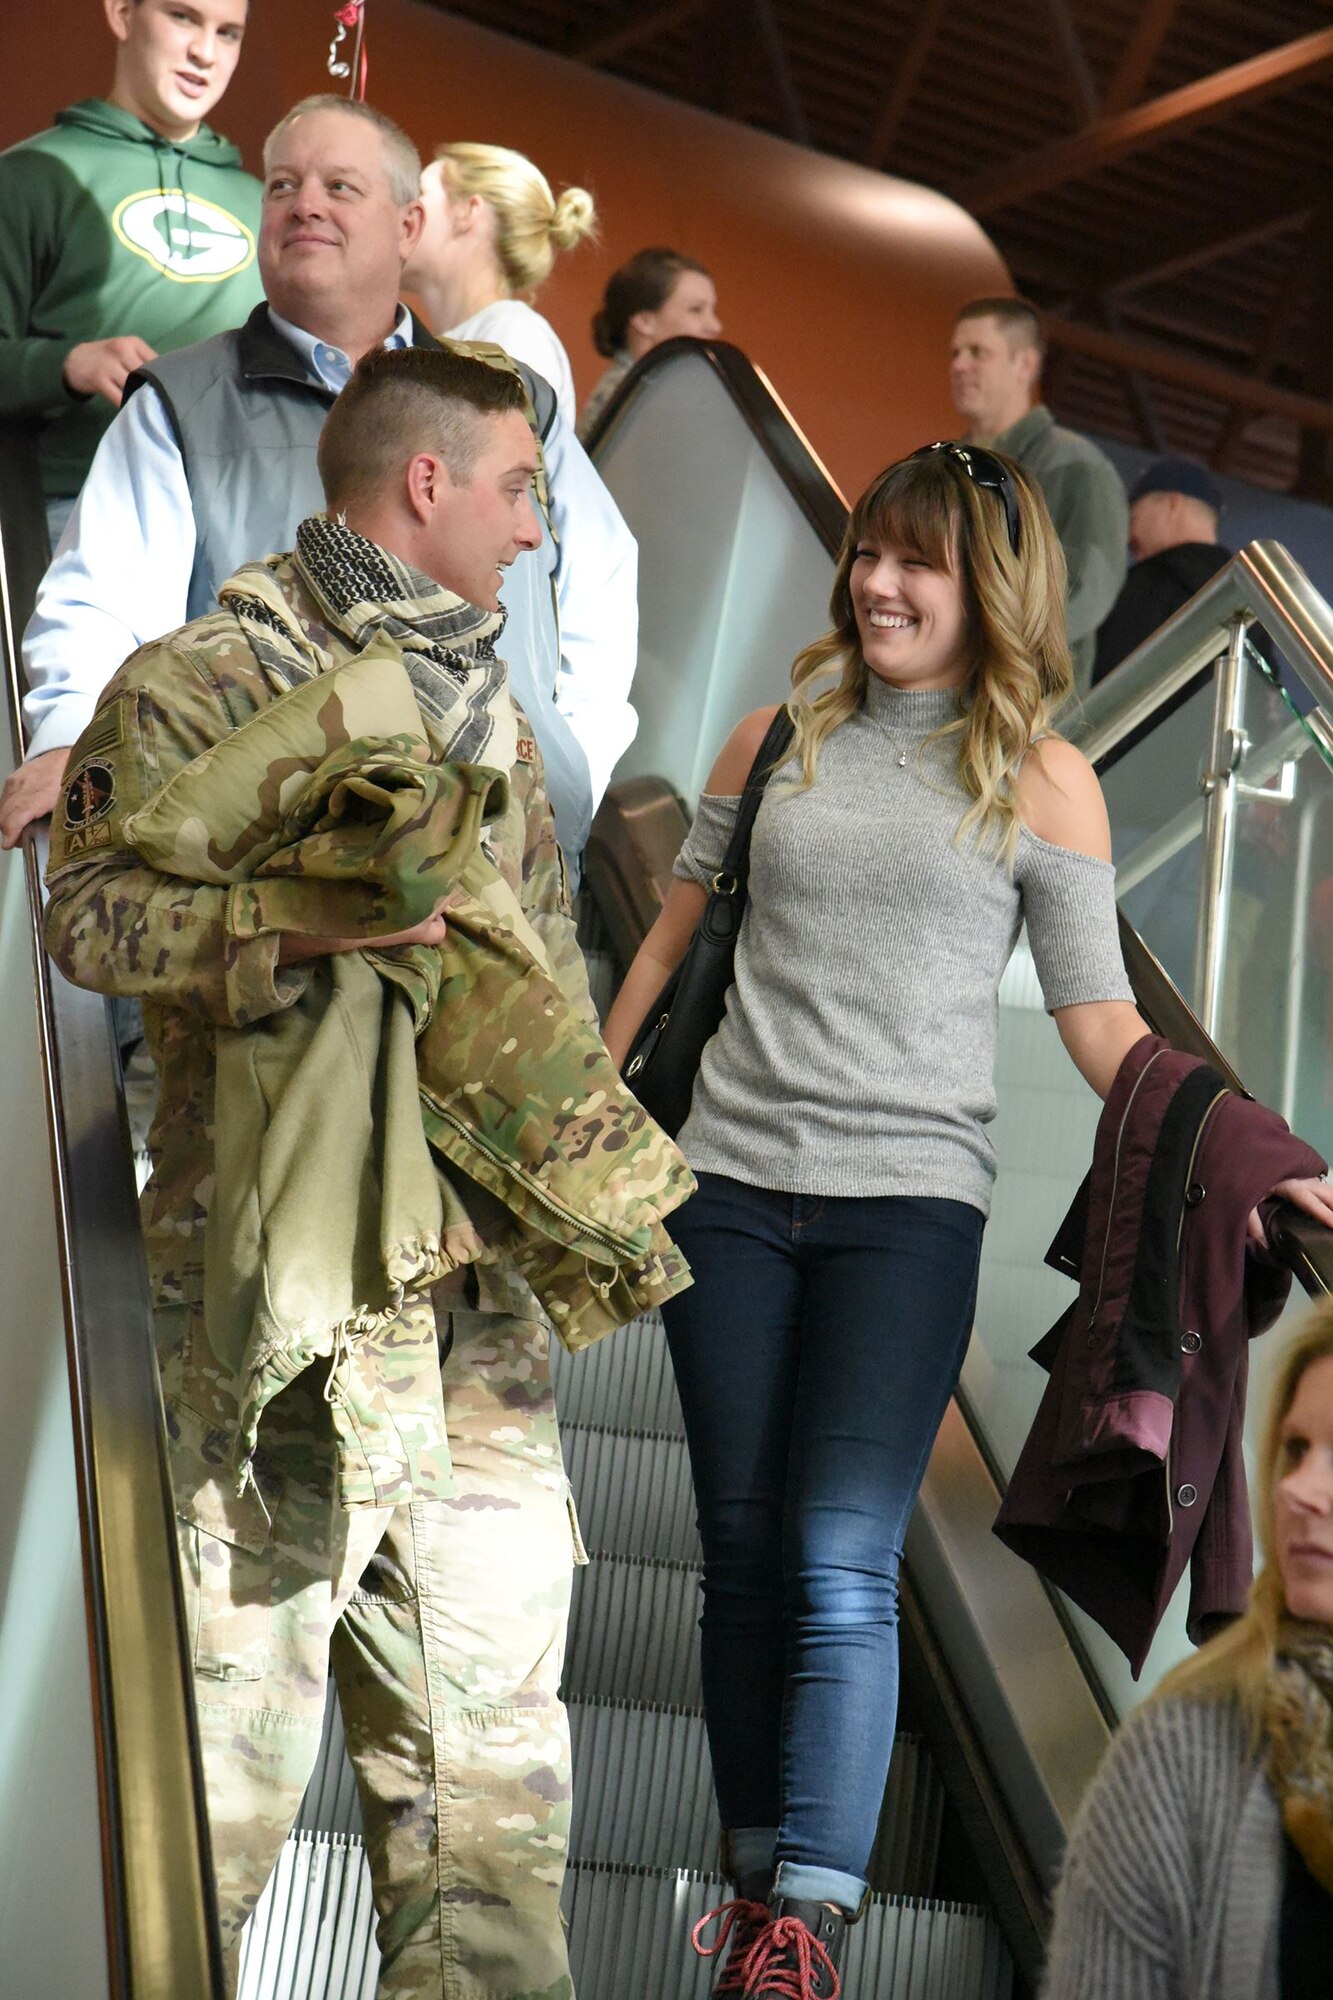 Staff Sgt. Zak Bergstrom, of the 119th Security Forces Squadron, North Dakota Air National Guard, returns from deployment.